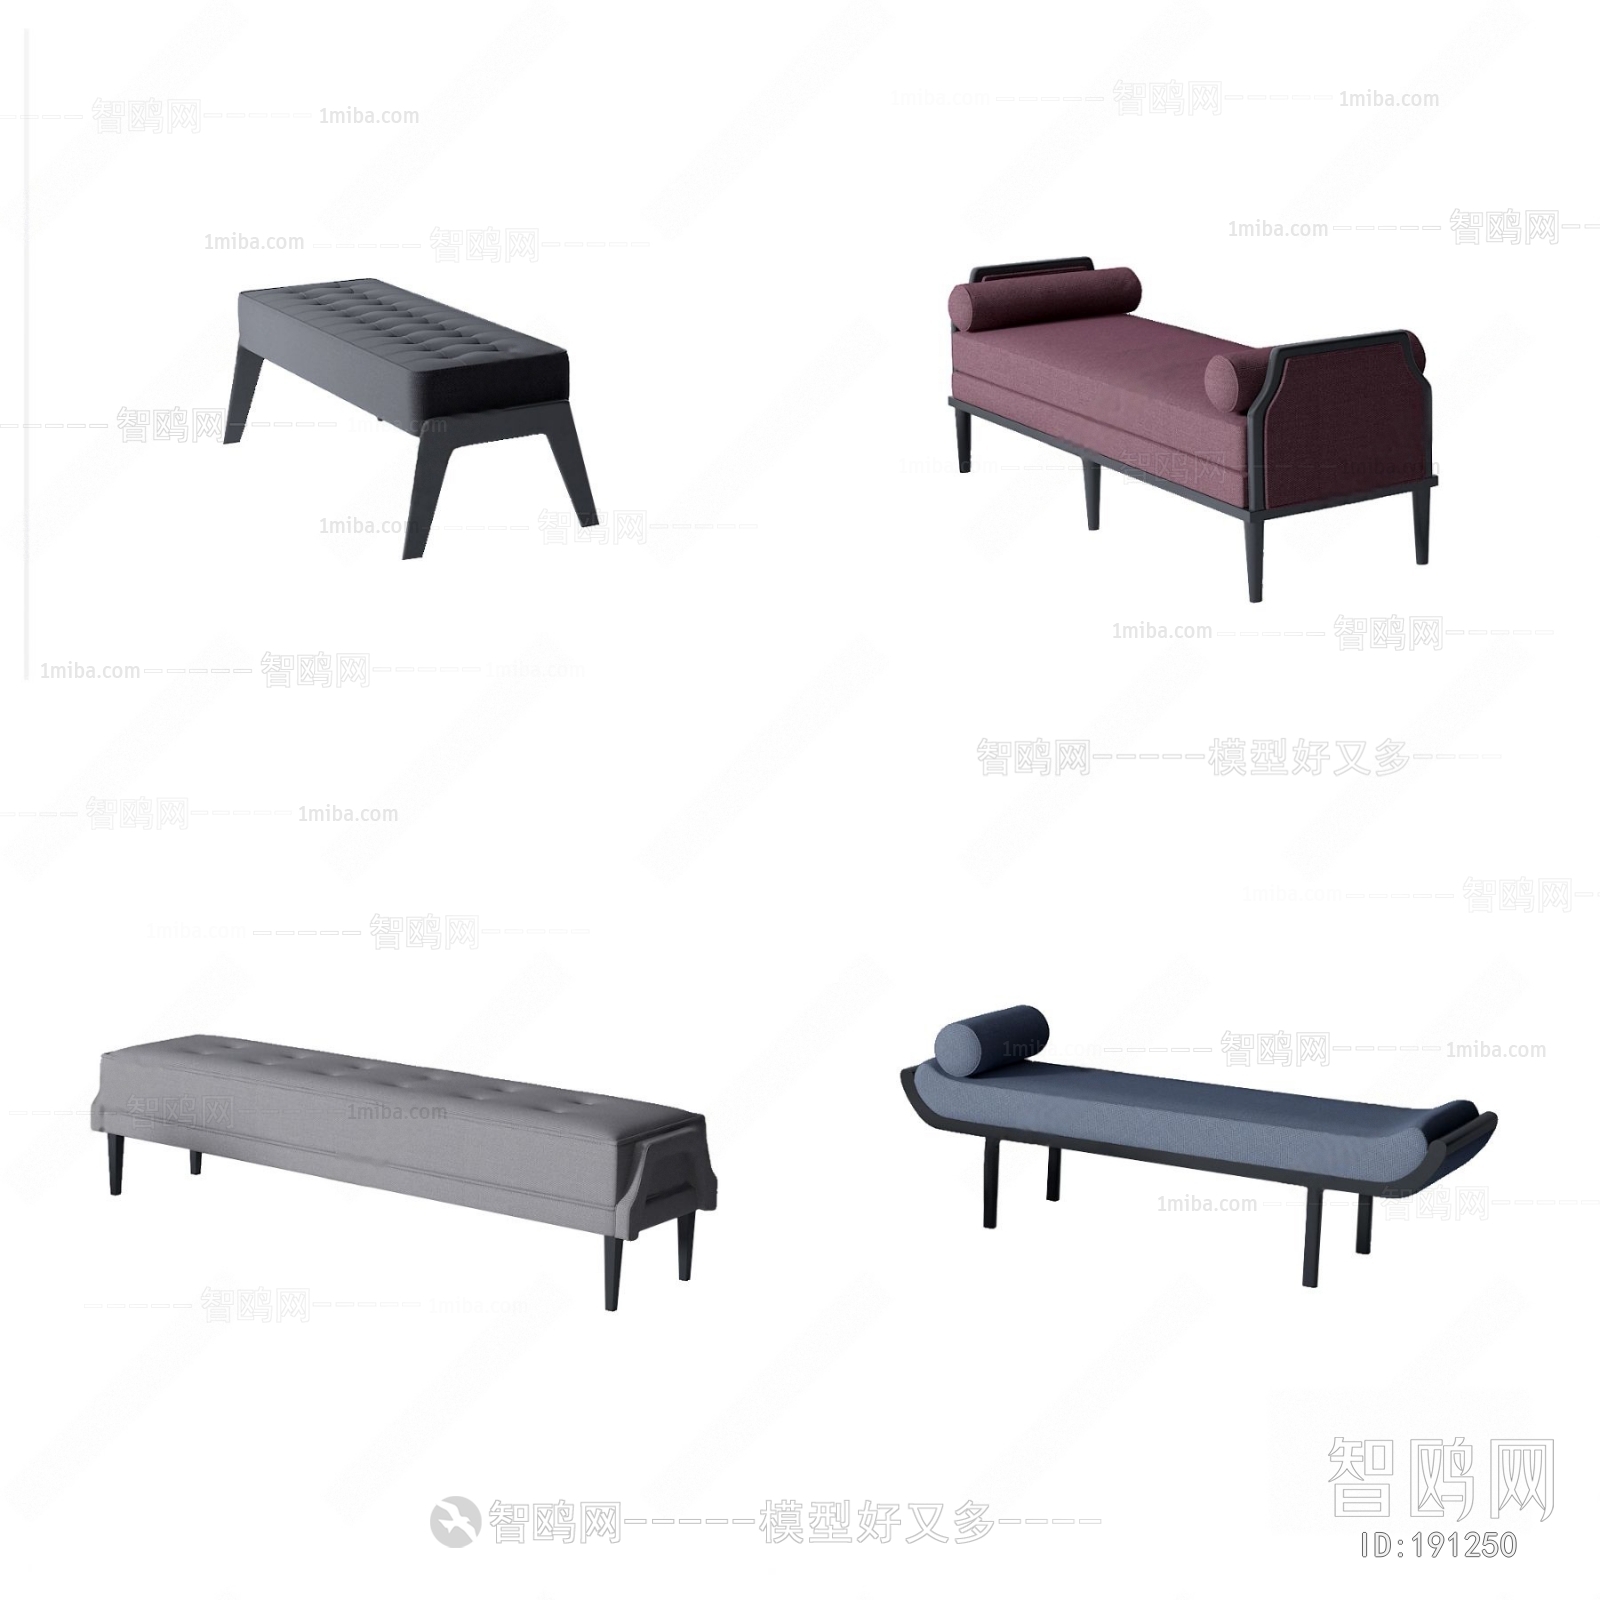 New Chinese Style Footstool